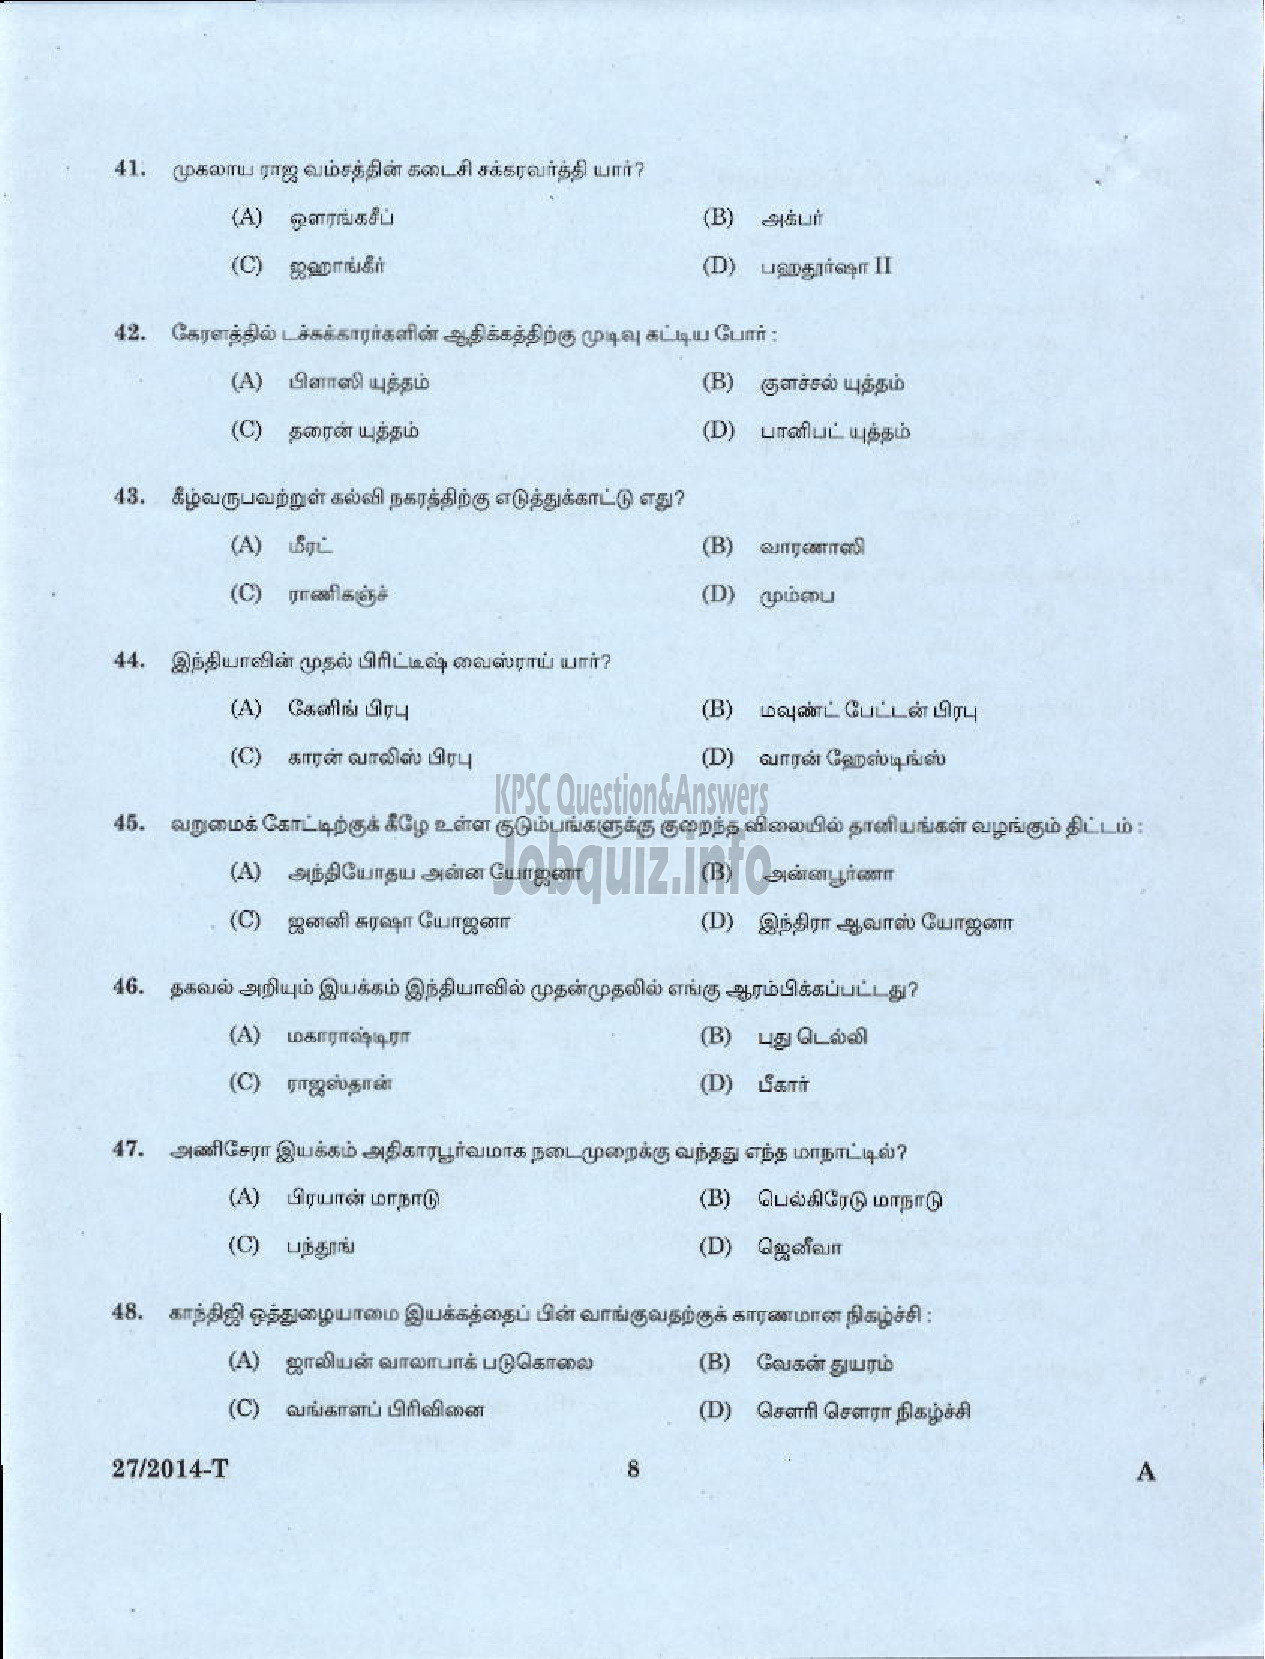 Kerala PSC Question Paper - LOWER DIVISION CLERK 2014 VARIOUS BY TRANSFER ( Tamil )-6